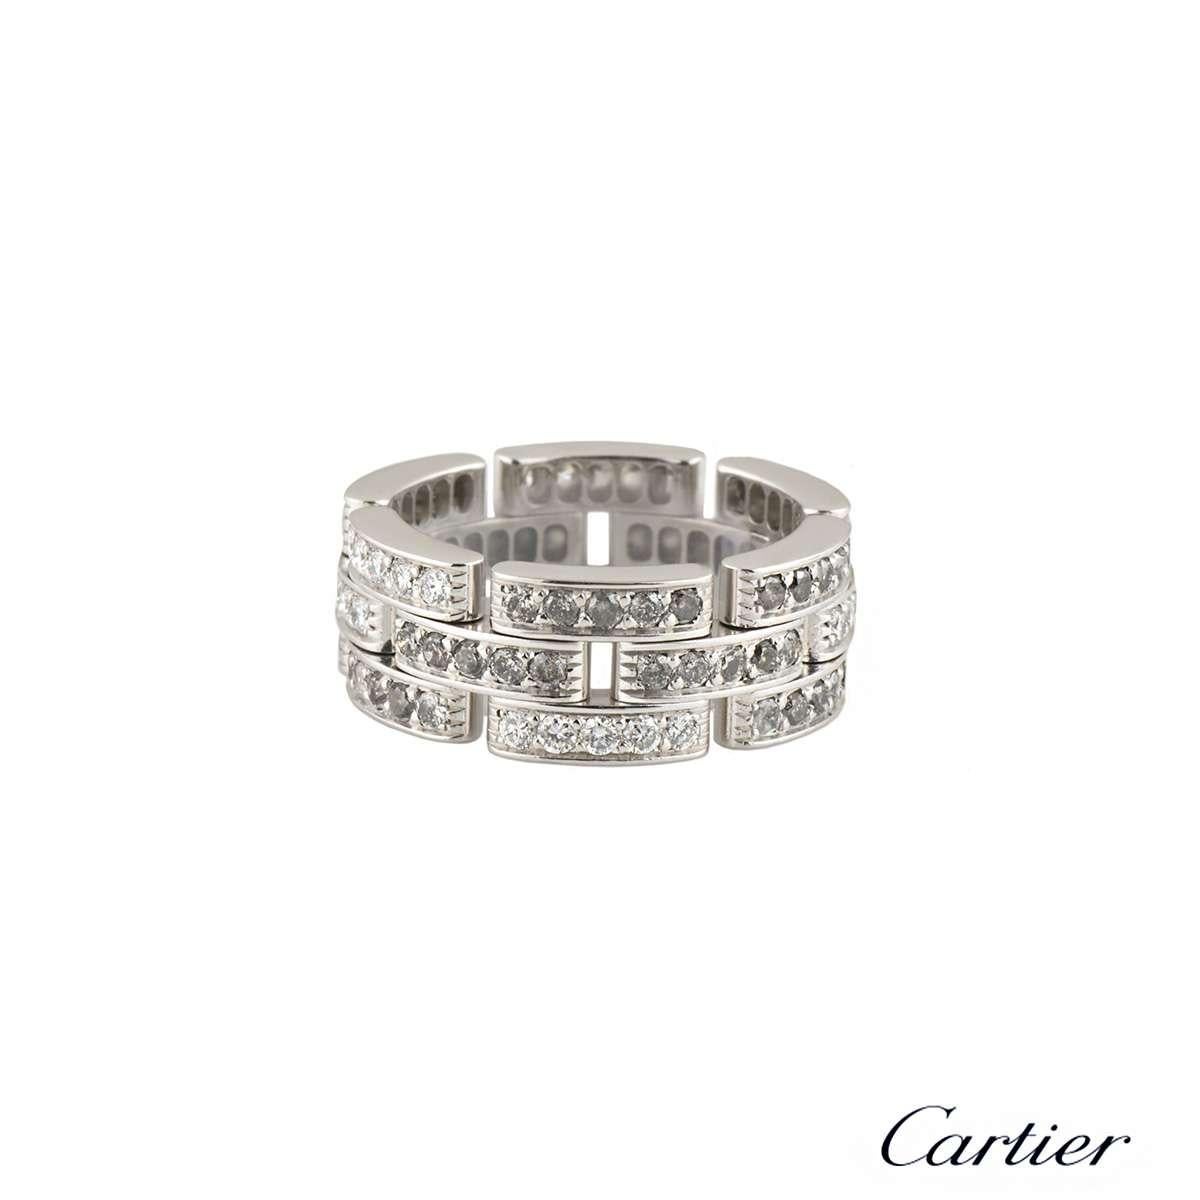 A stunning 18k white gold Cartier diamond Maillon Panthere ring from the Links and Chains collection. The ring comprises of 3 rows of 18 open work flexible panels, each panel is pave set with five round brilliant cut diamonds totalling approximately